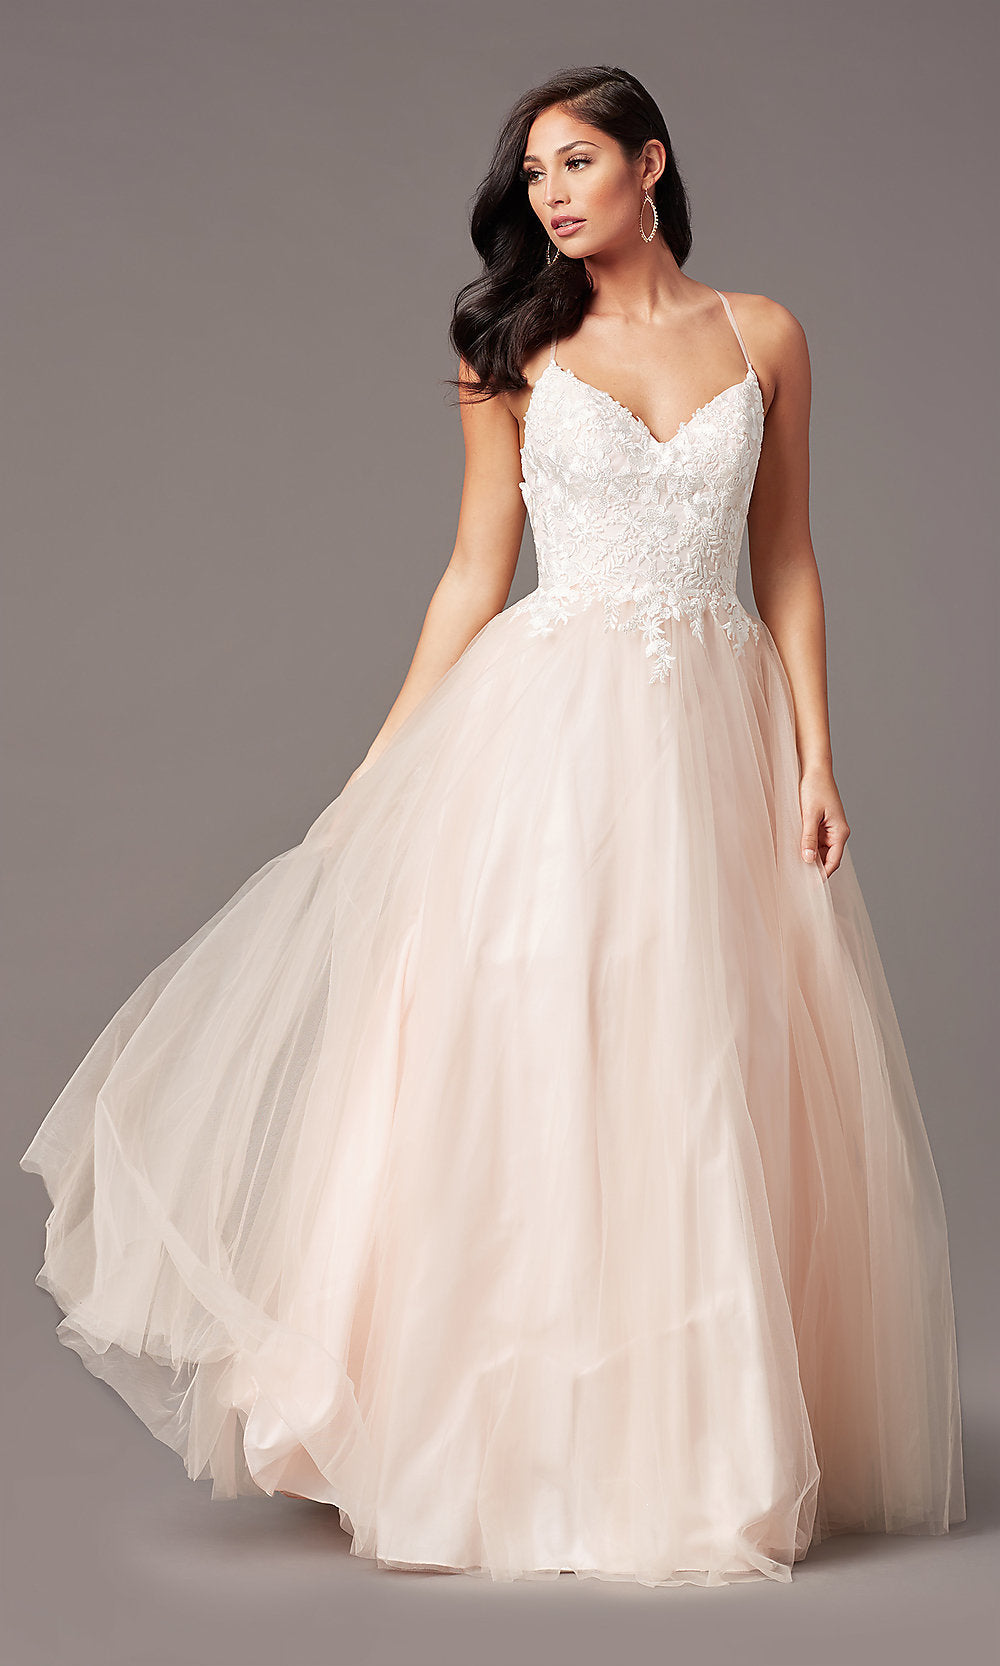  Ball-Gown-Style Long Formal Prom Dress by PromGirl